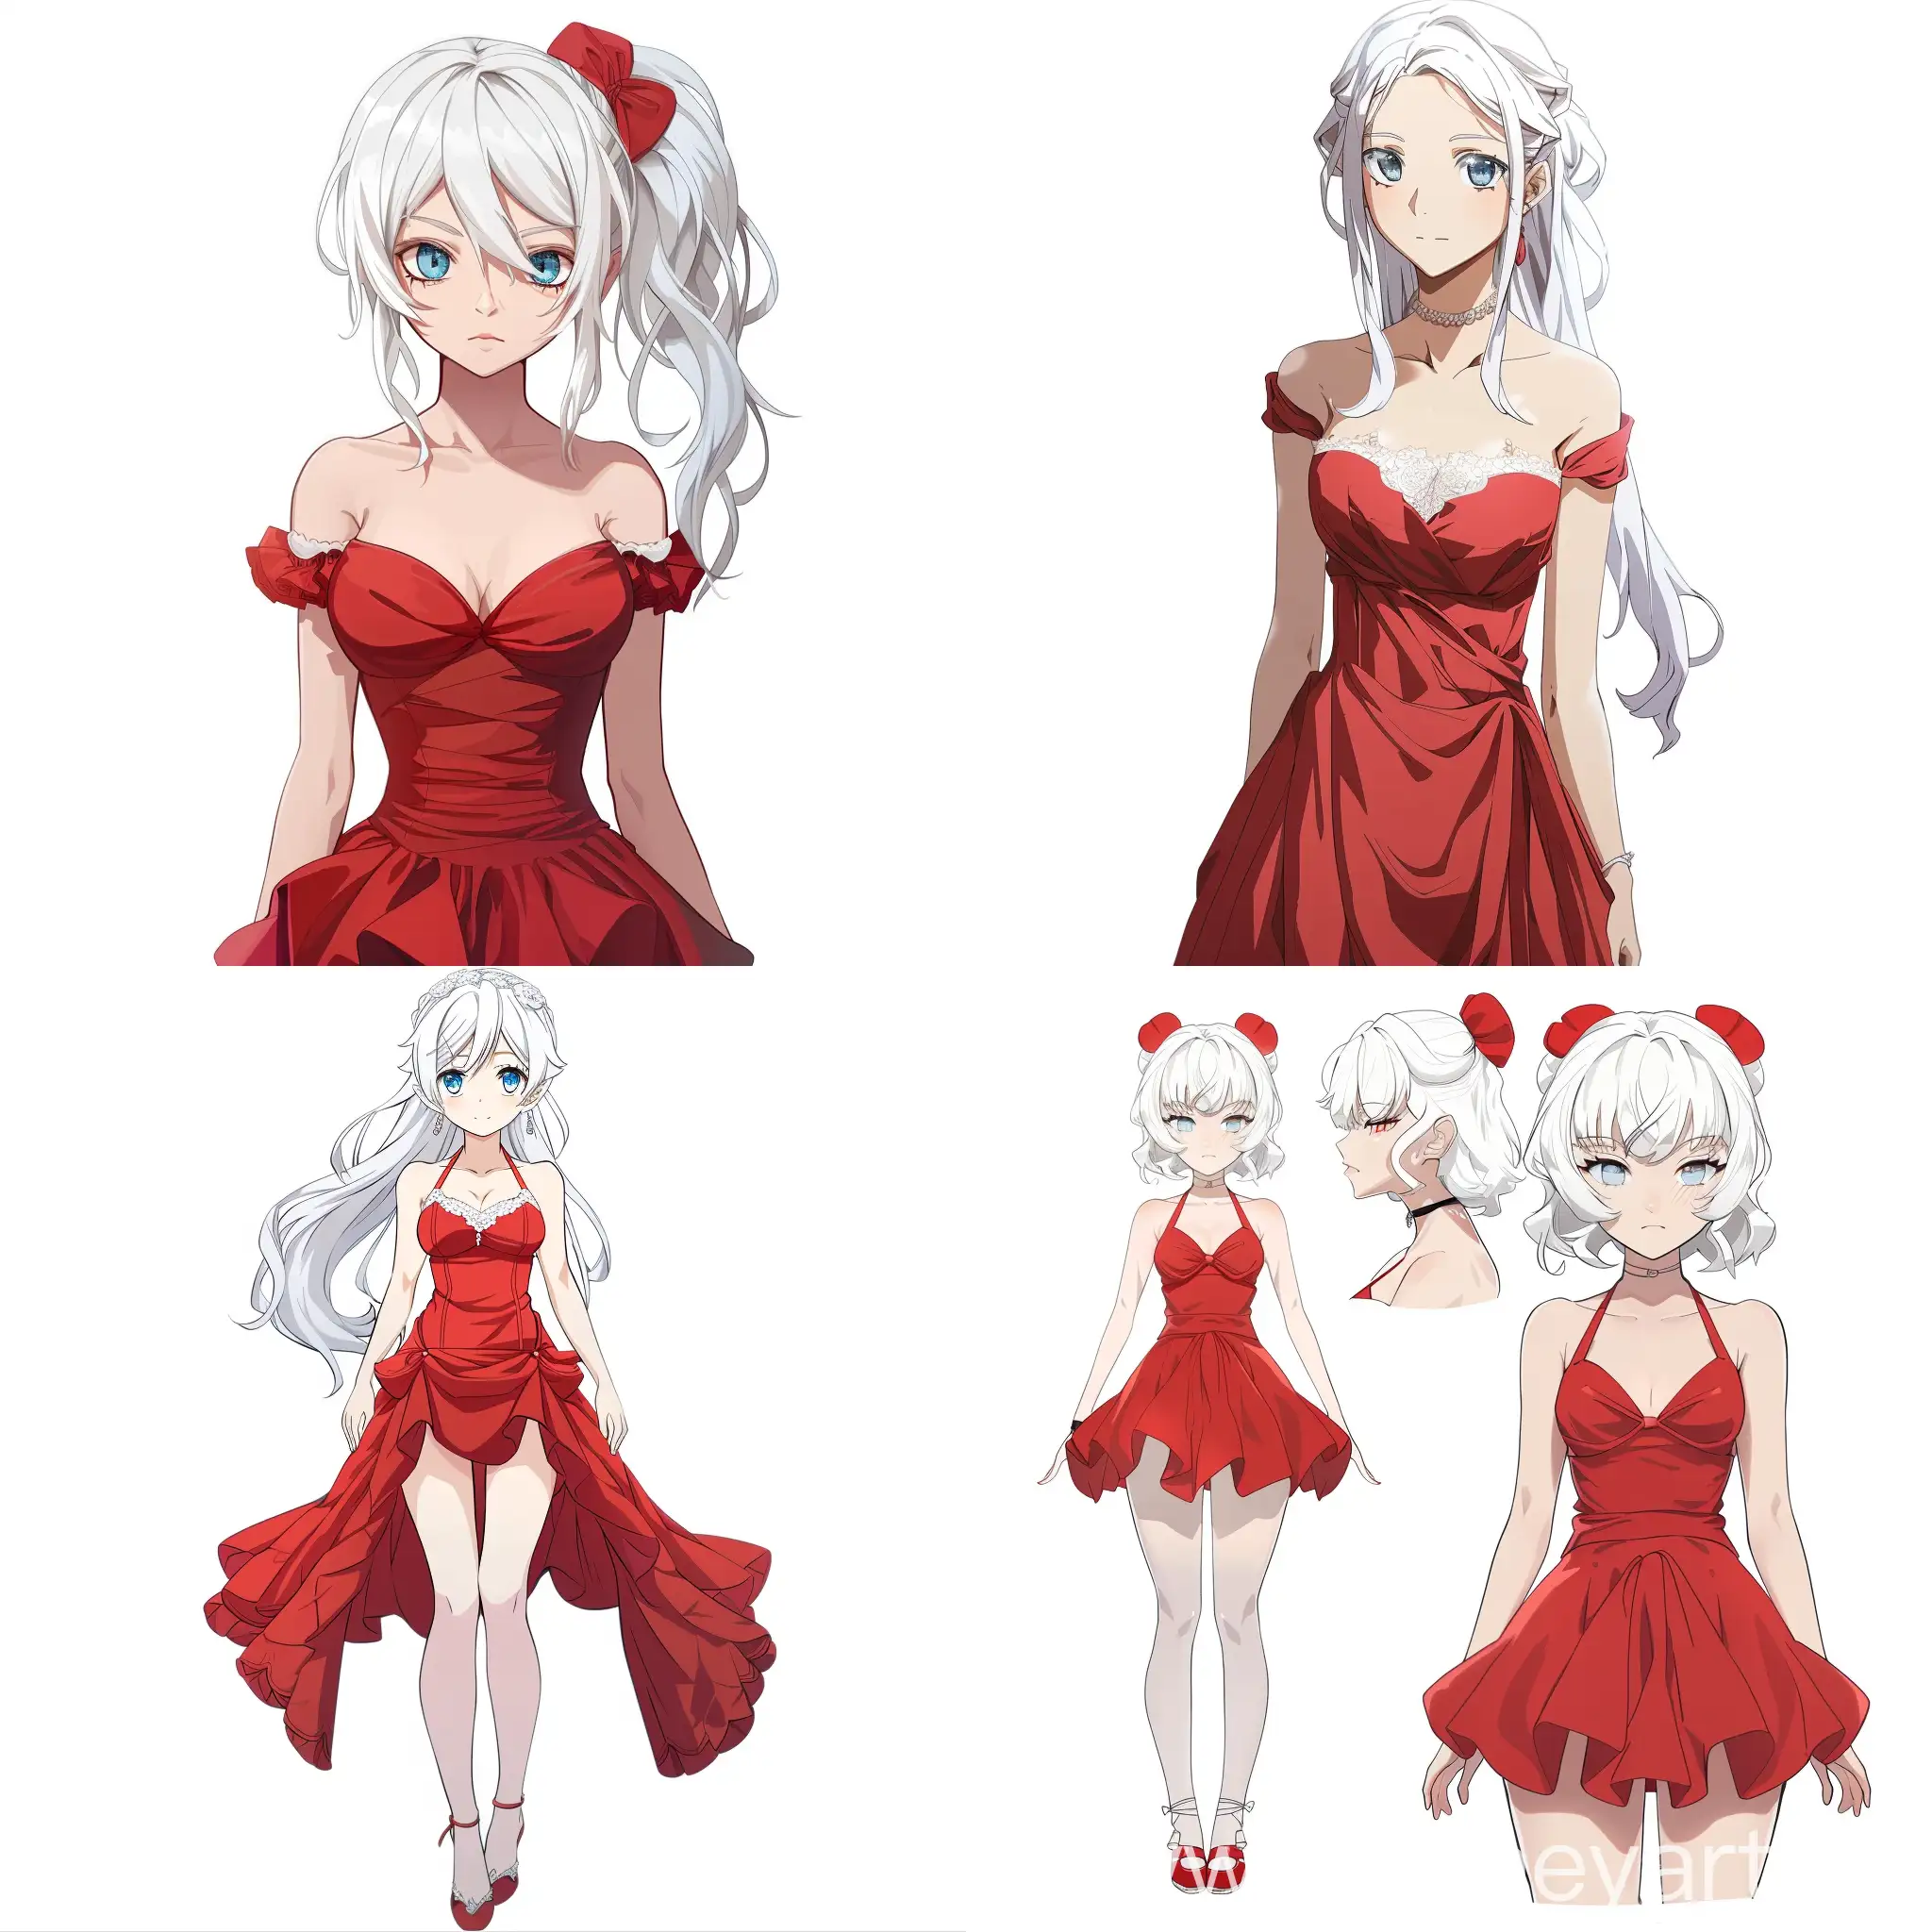 Original-WhiteHaired-Girl-in-Red-Dress-Anime-Fantasy-Character-Reference